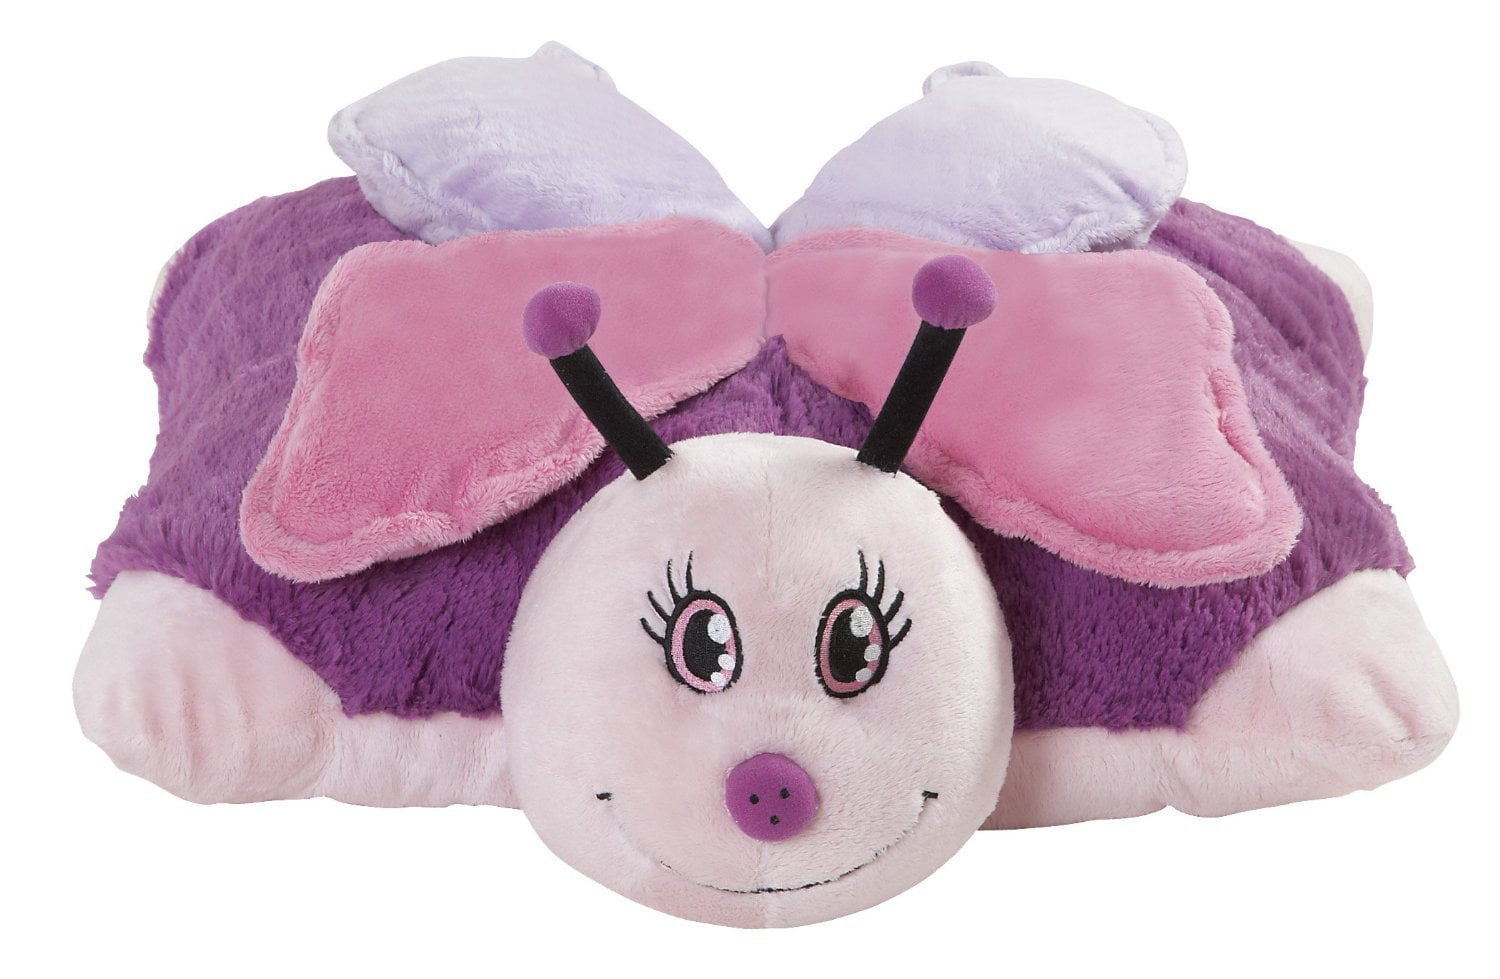 Butterfly Zoopurr Pets 24" Large 2-in-1 Stuffed Animal & Pillow Plush Soft Kids 